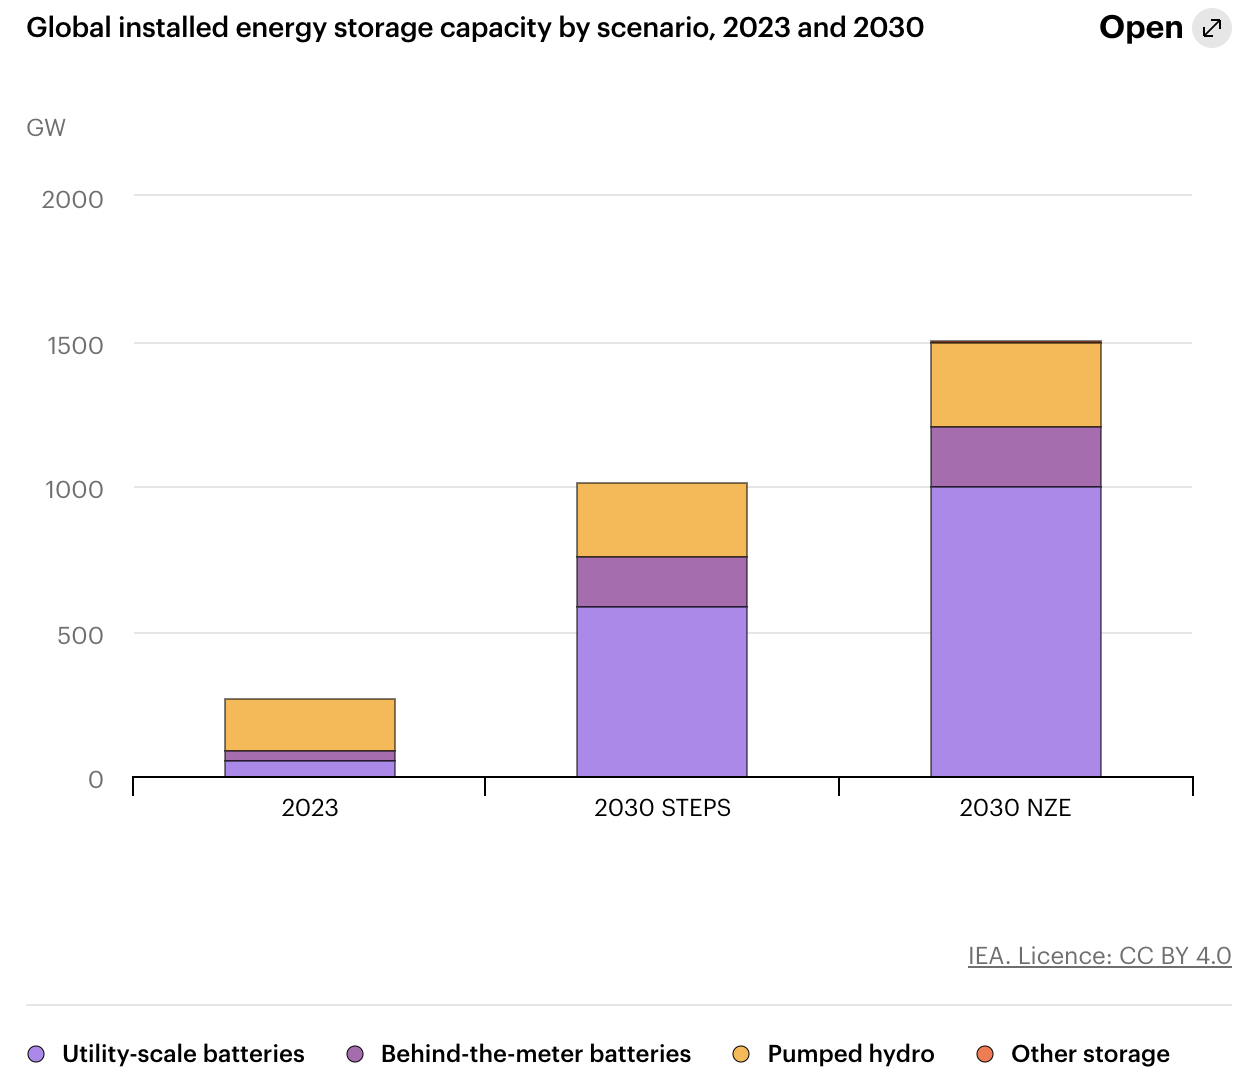 Battery storage increase needed for 2030 climate goals